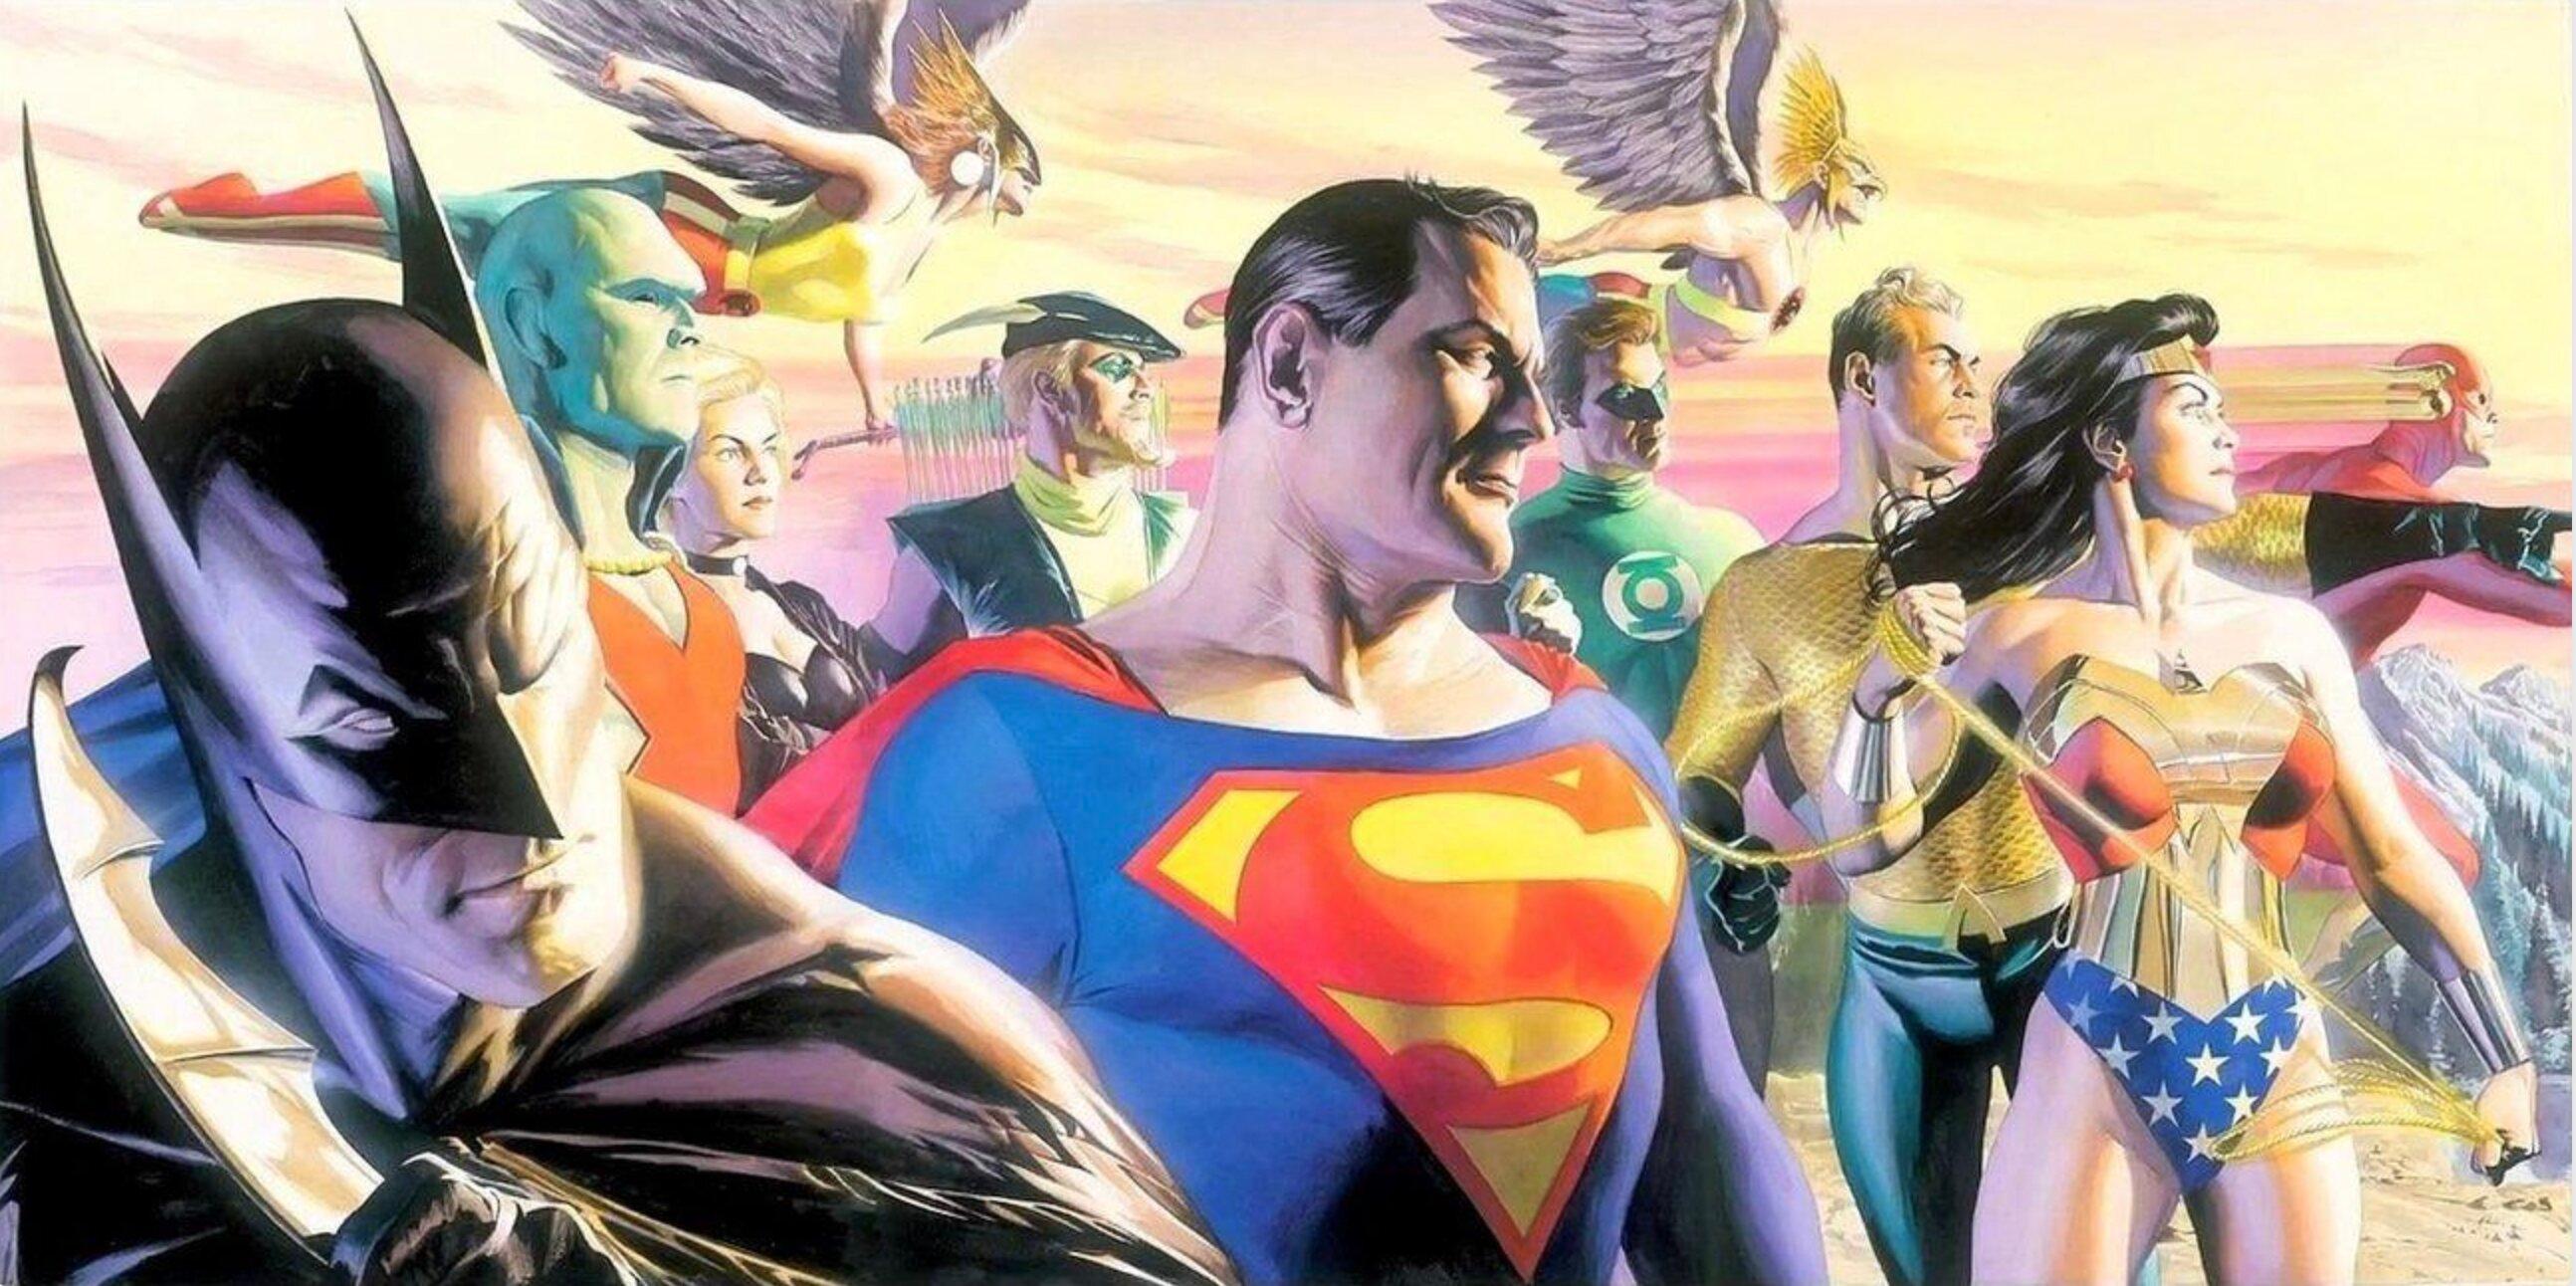 In The Light Of Justice By (First Edition) signed by Alex Ross